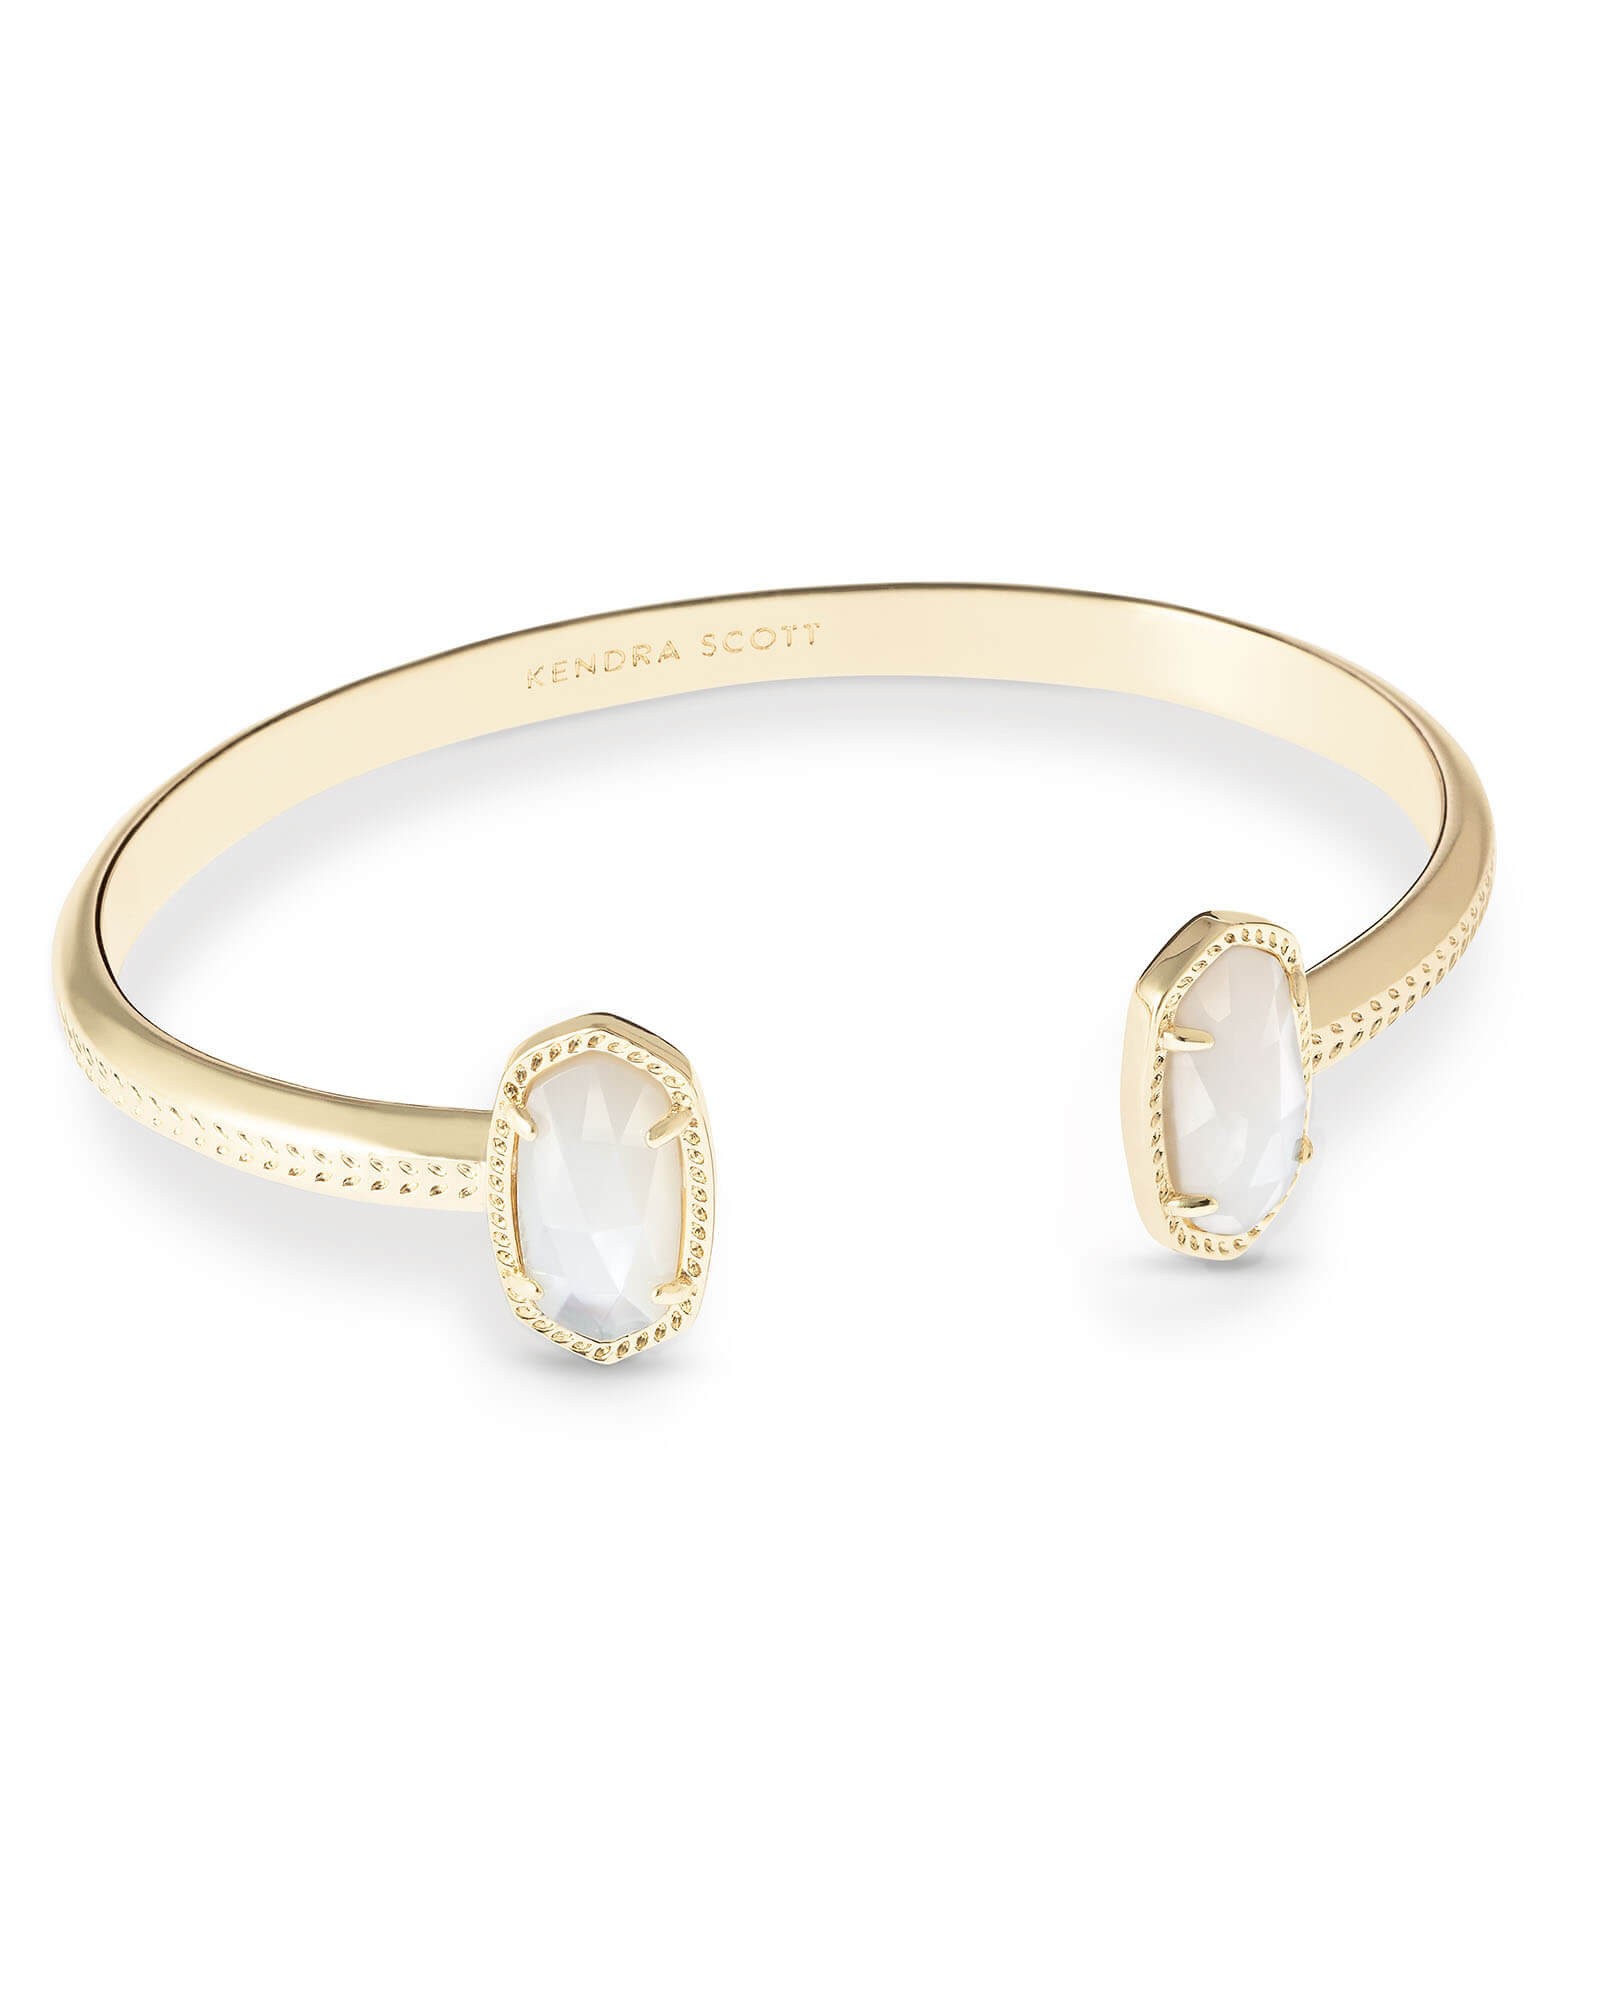 Kendra Scott Elton Gold Cuff Bracelet in Ivory Mother-of-Pearl | Mother Of Pearl